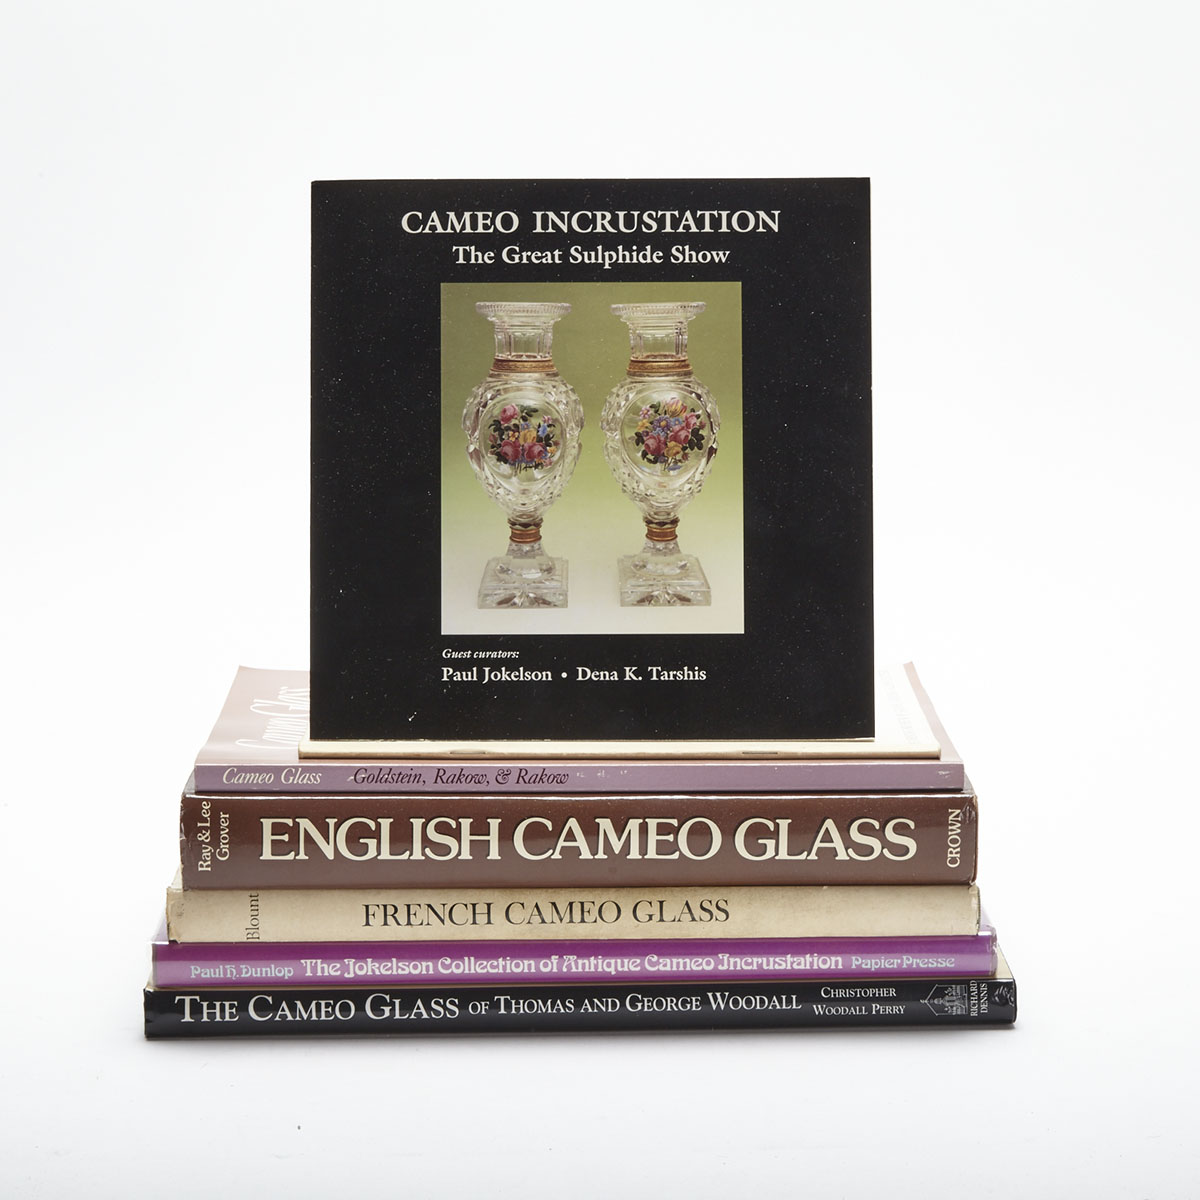 Cameo and Sulphide Glass (7 volumes) 